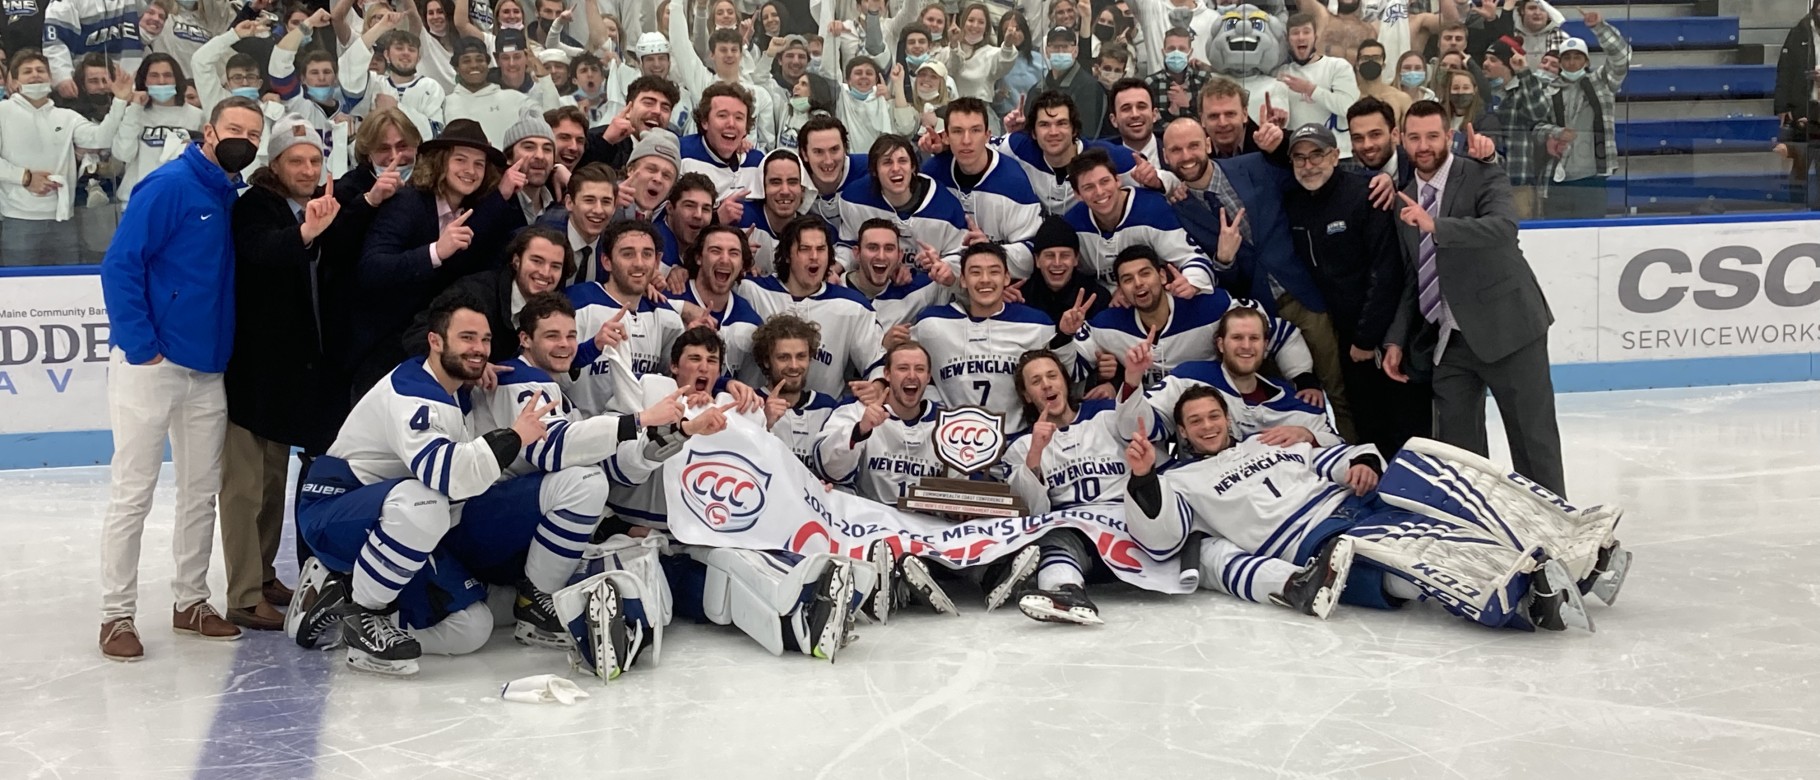 A large crowd of students and ice hockey players pose on the ice after the Nor'easters men's ice hockey team won the CCC championship